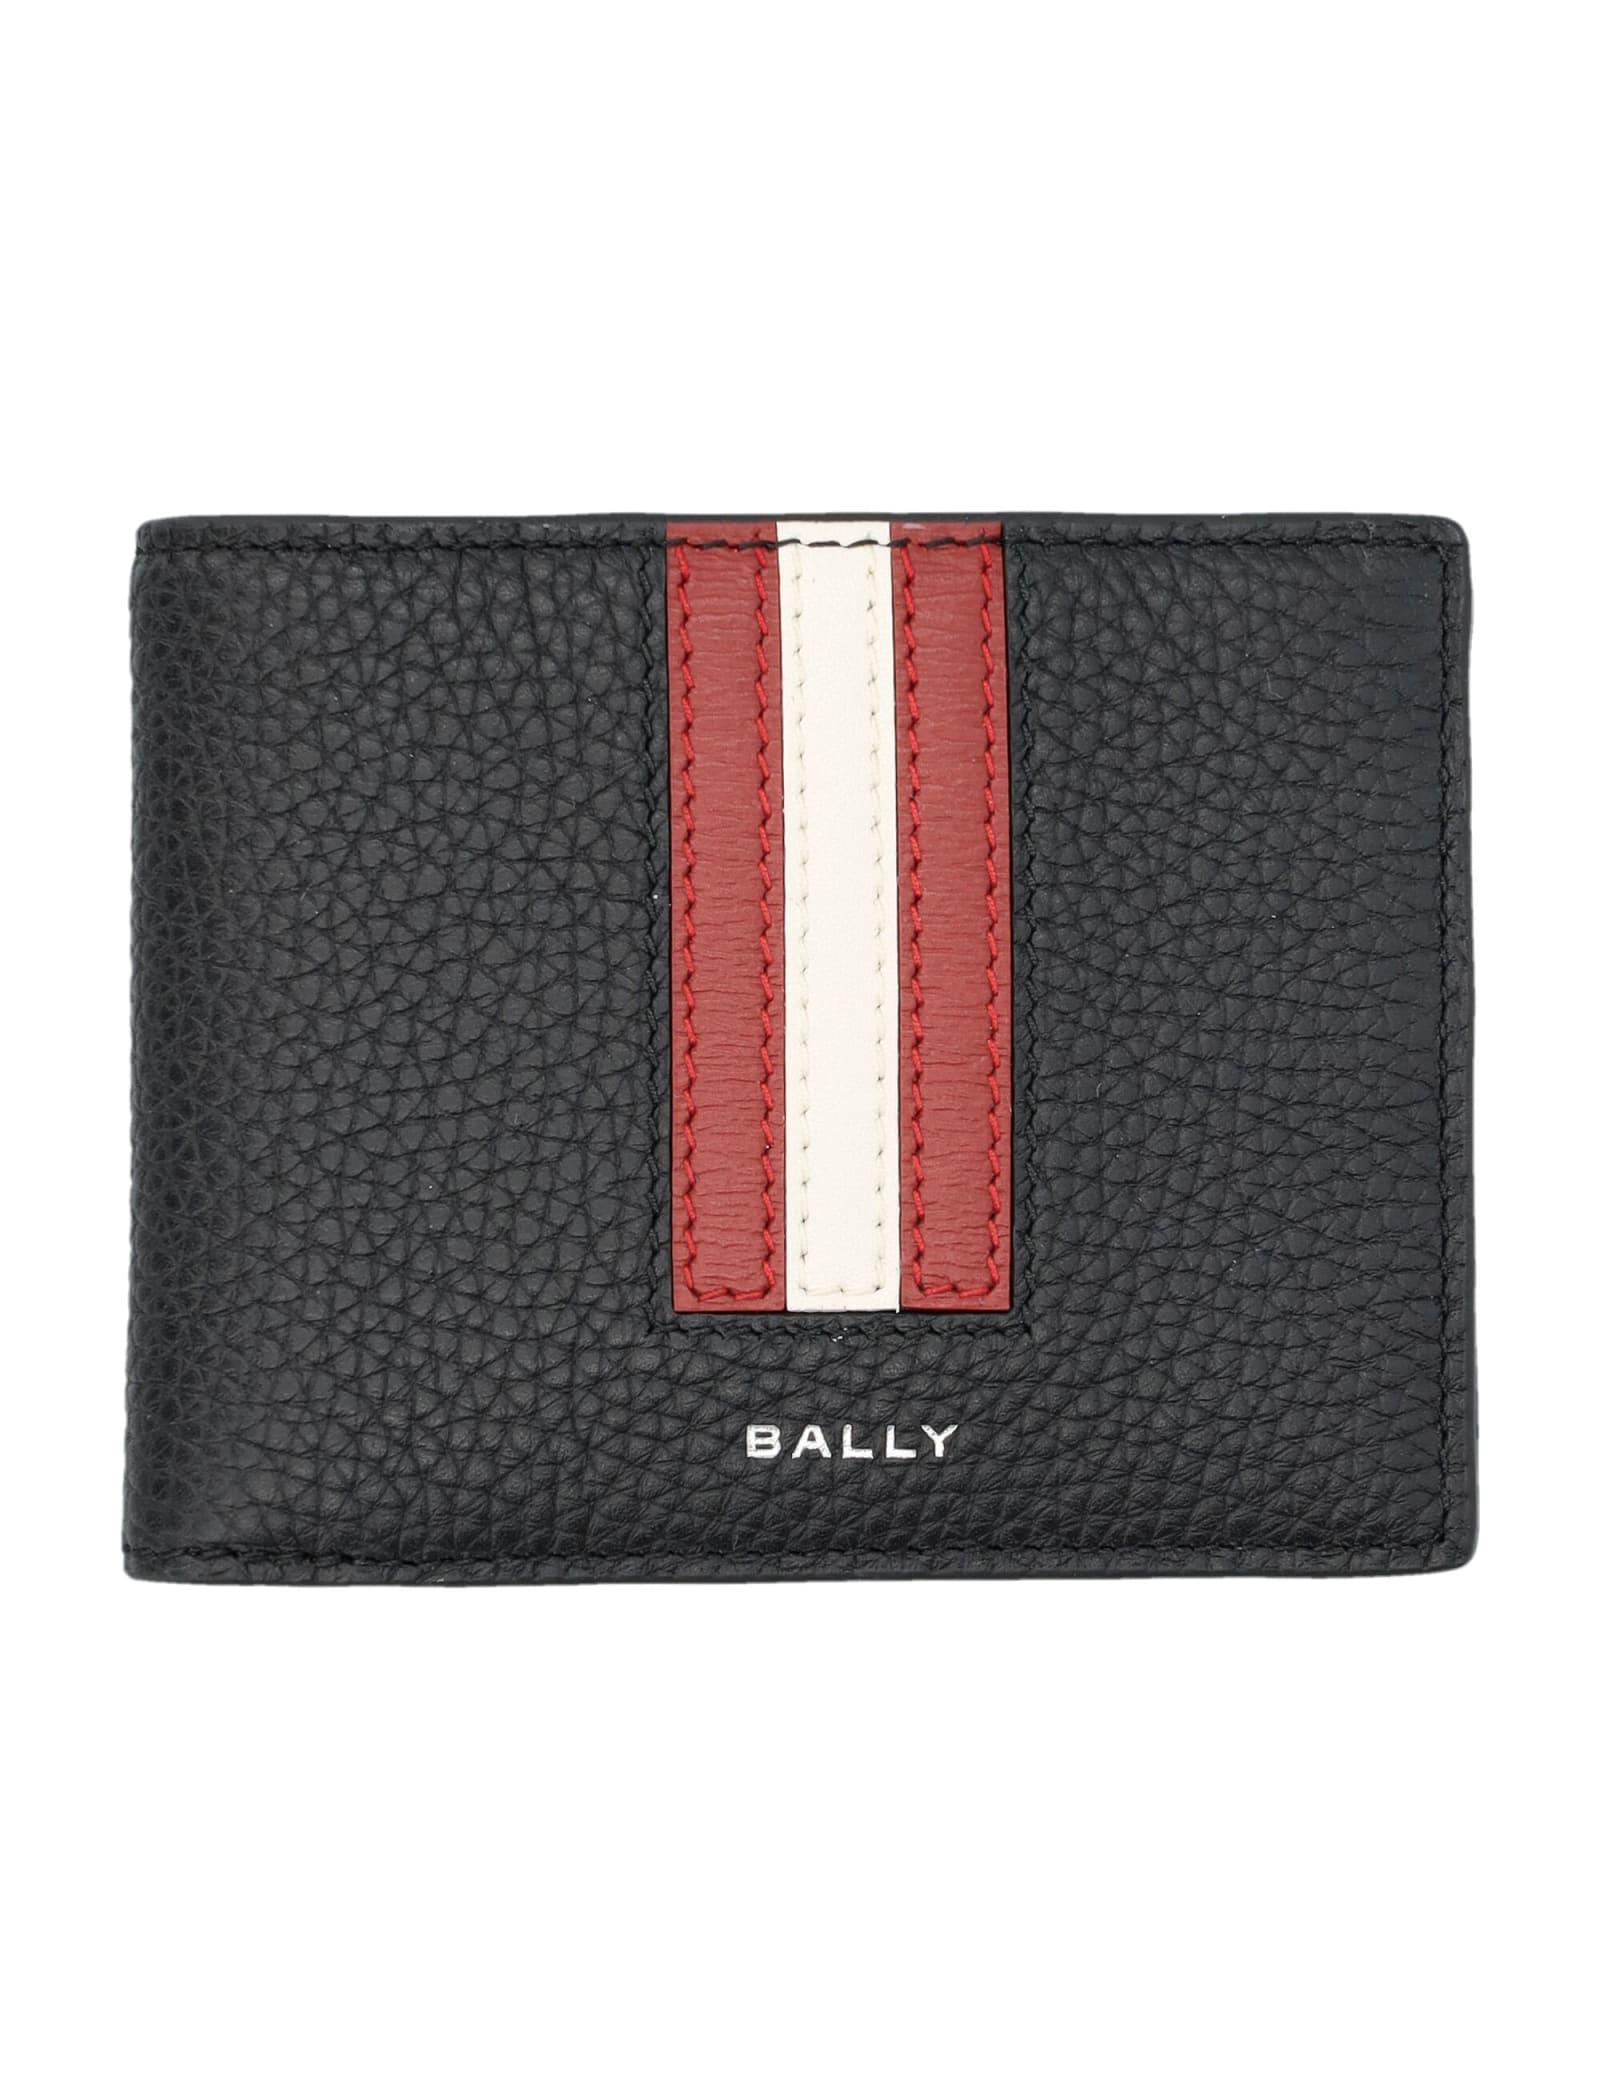 Shop Bally Rbn Bifold 6cc Wallet In Black/red+pall